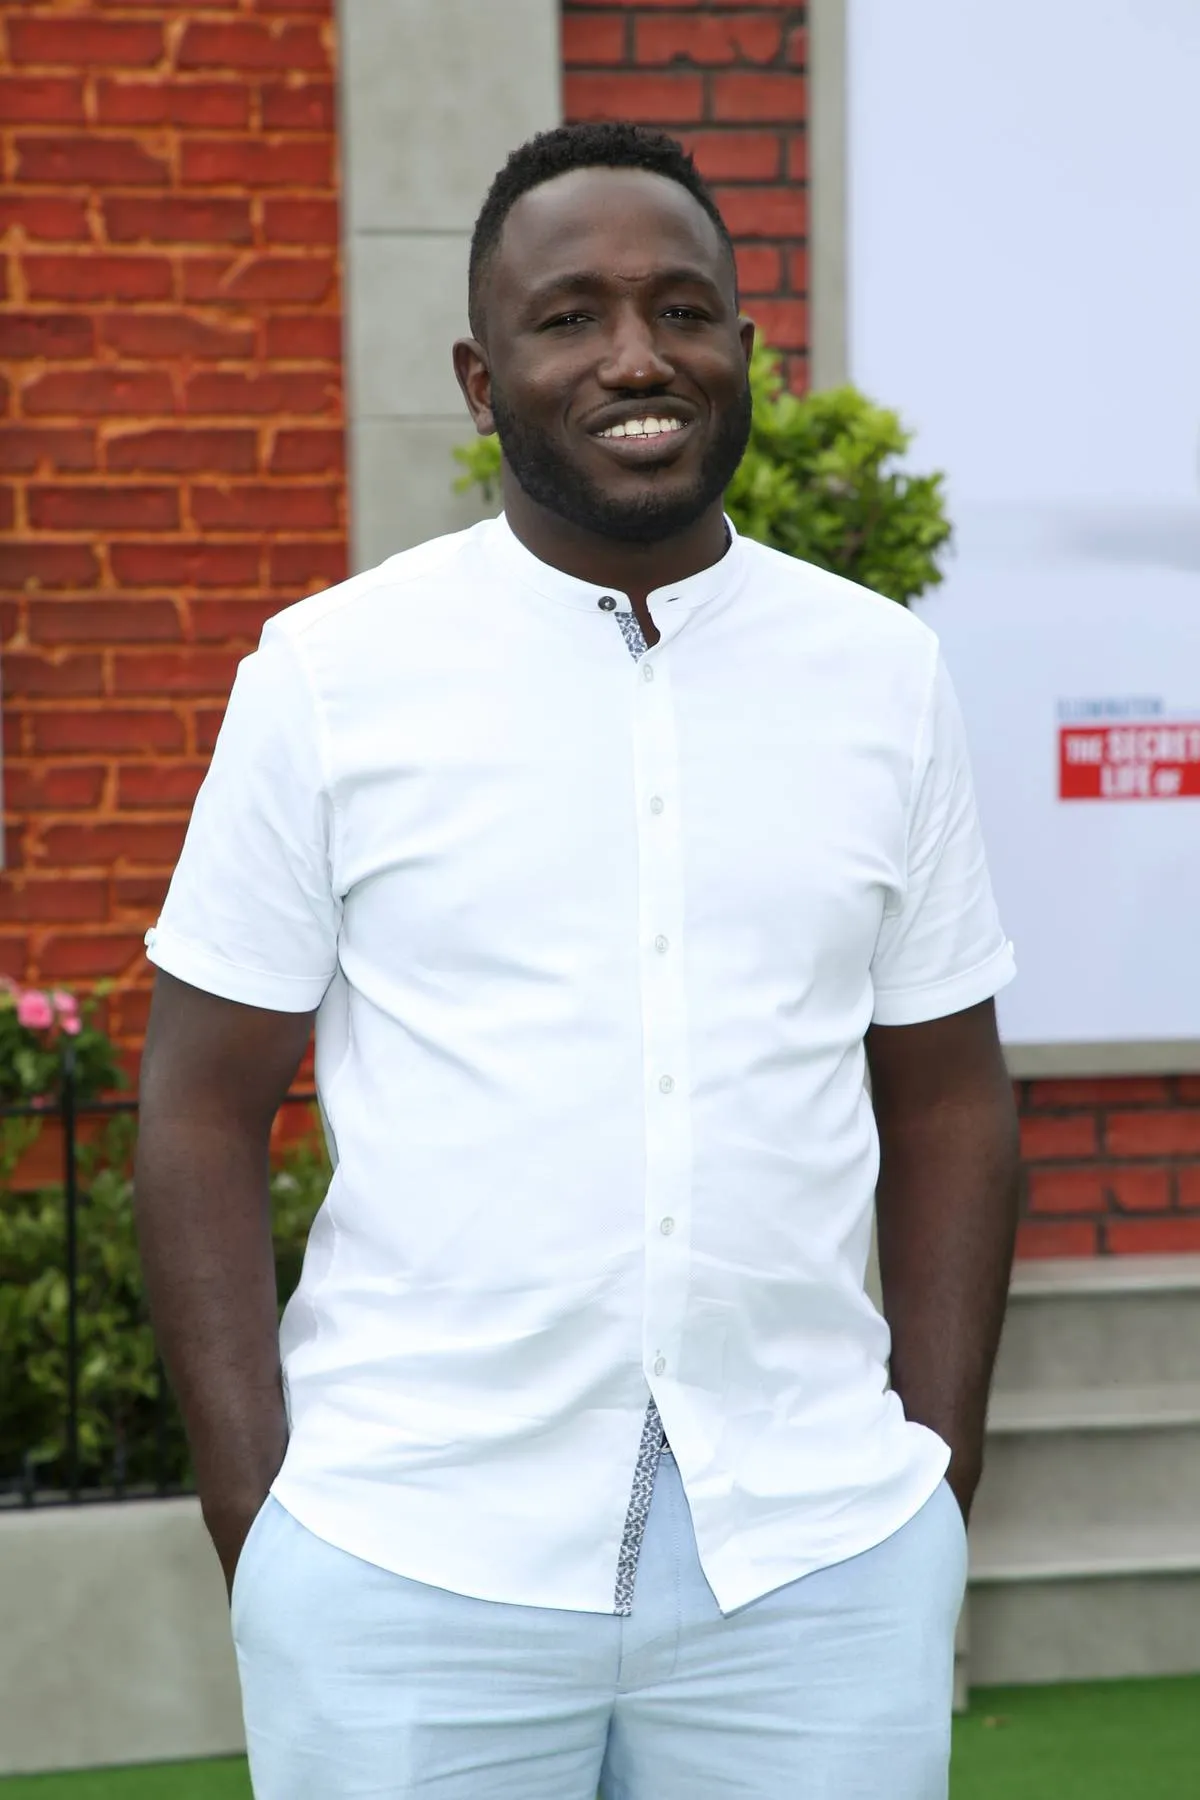 Hannibal Buress Has Performed On Many Late-Night Shows